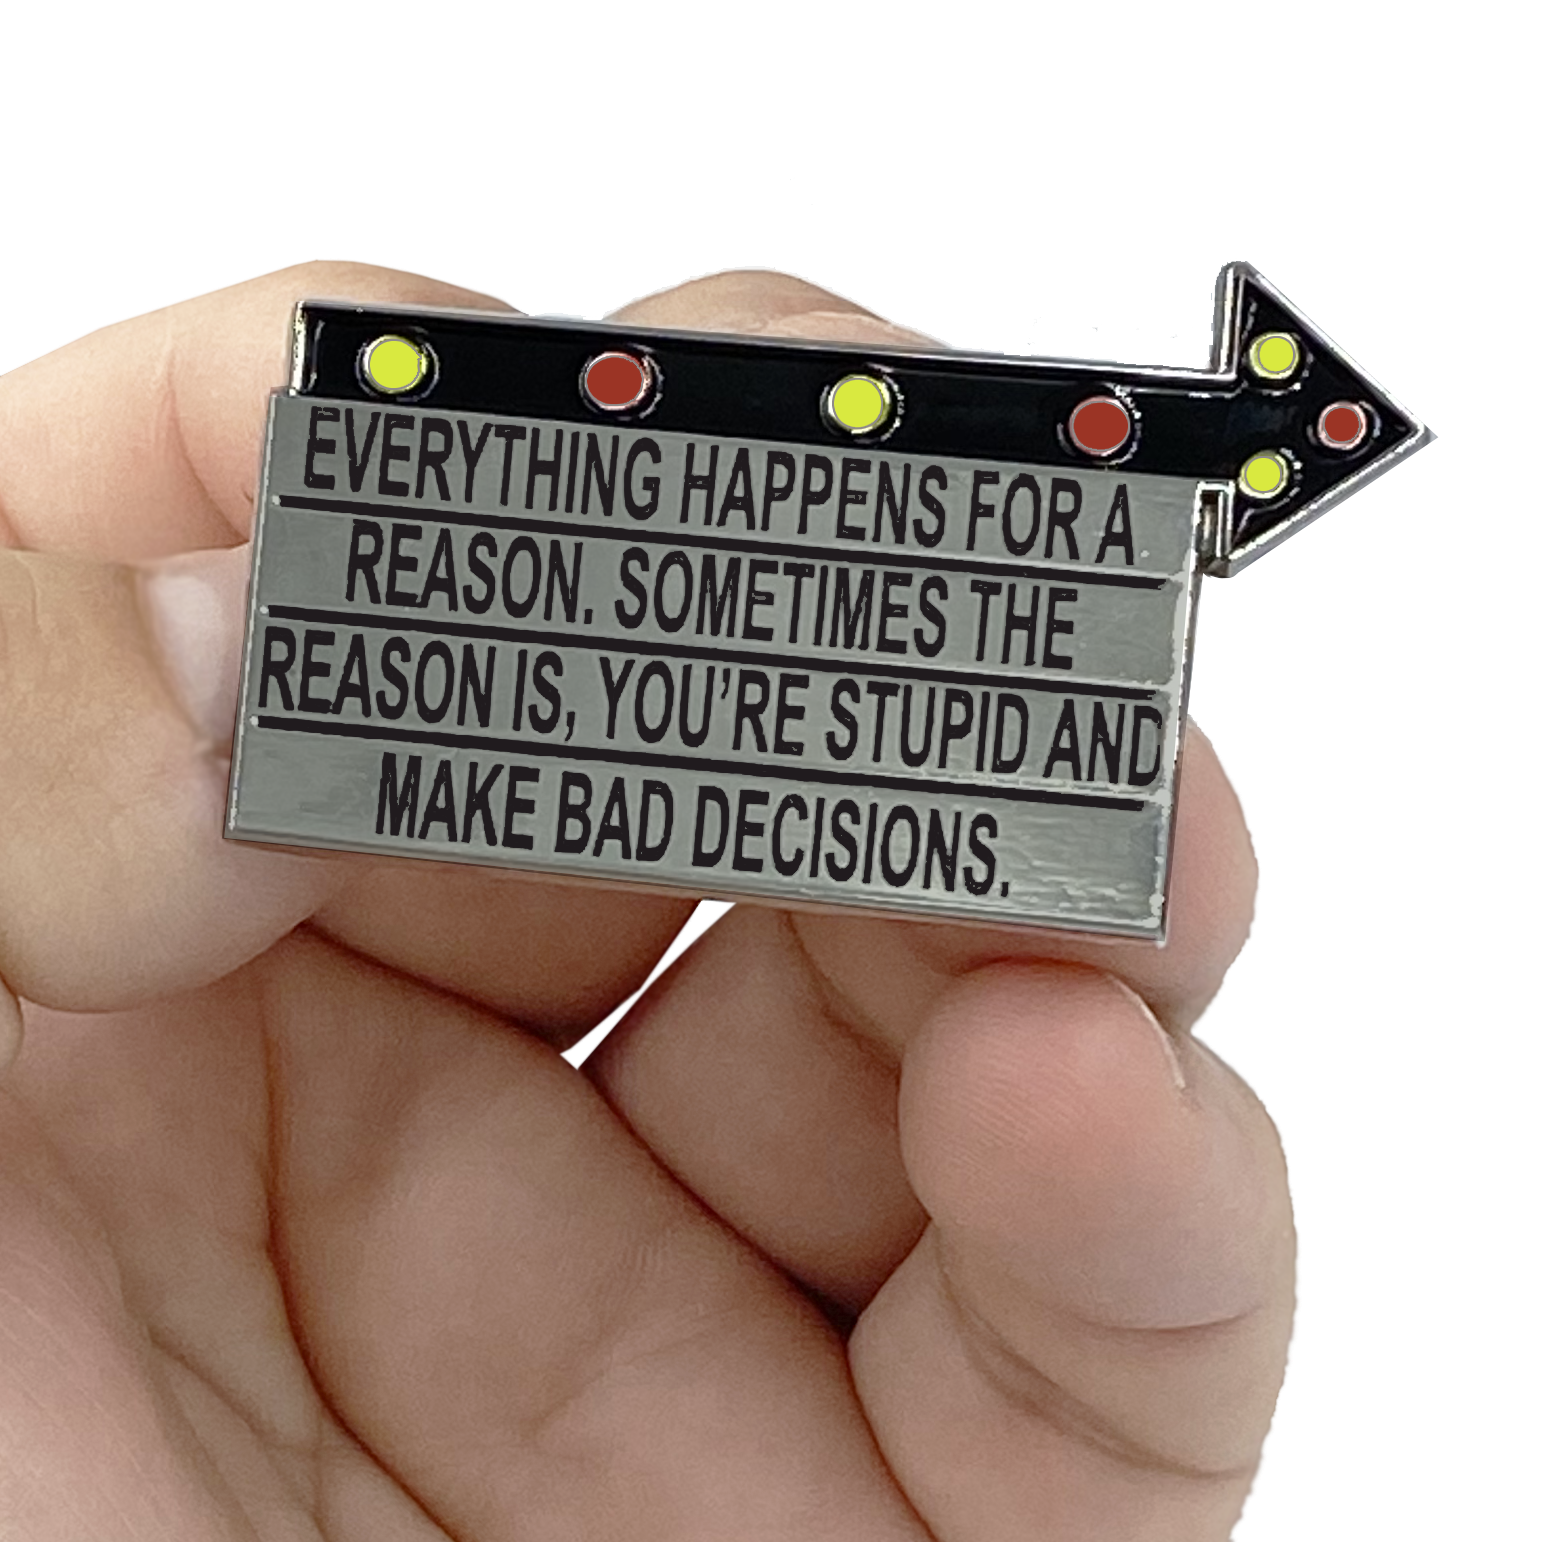 G-018 Billboard Pin: Everything Happens for a Reason. Sometimes the Reason is You're Stupid and Make Bad Decisions